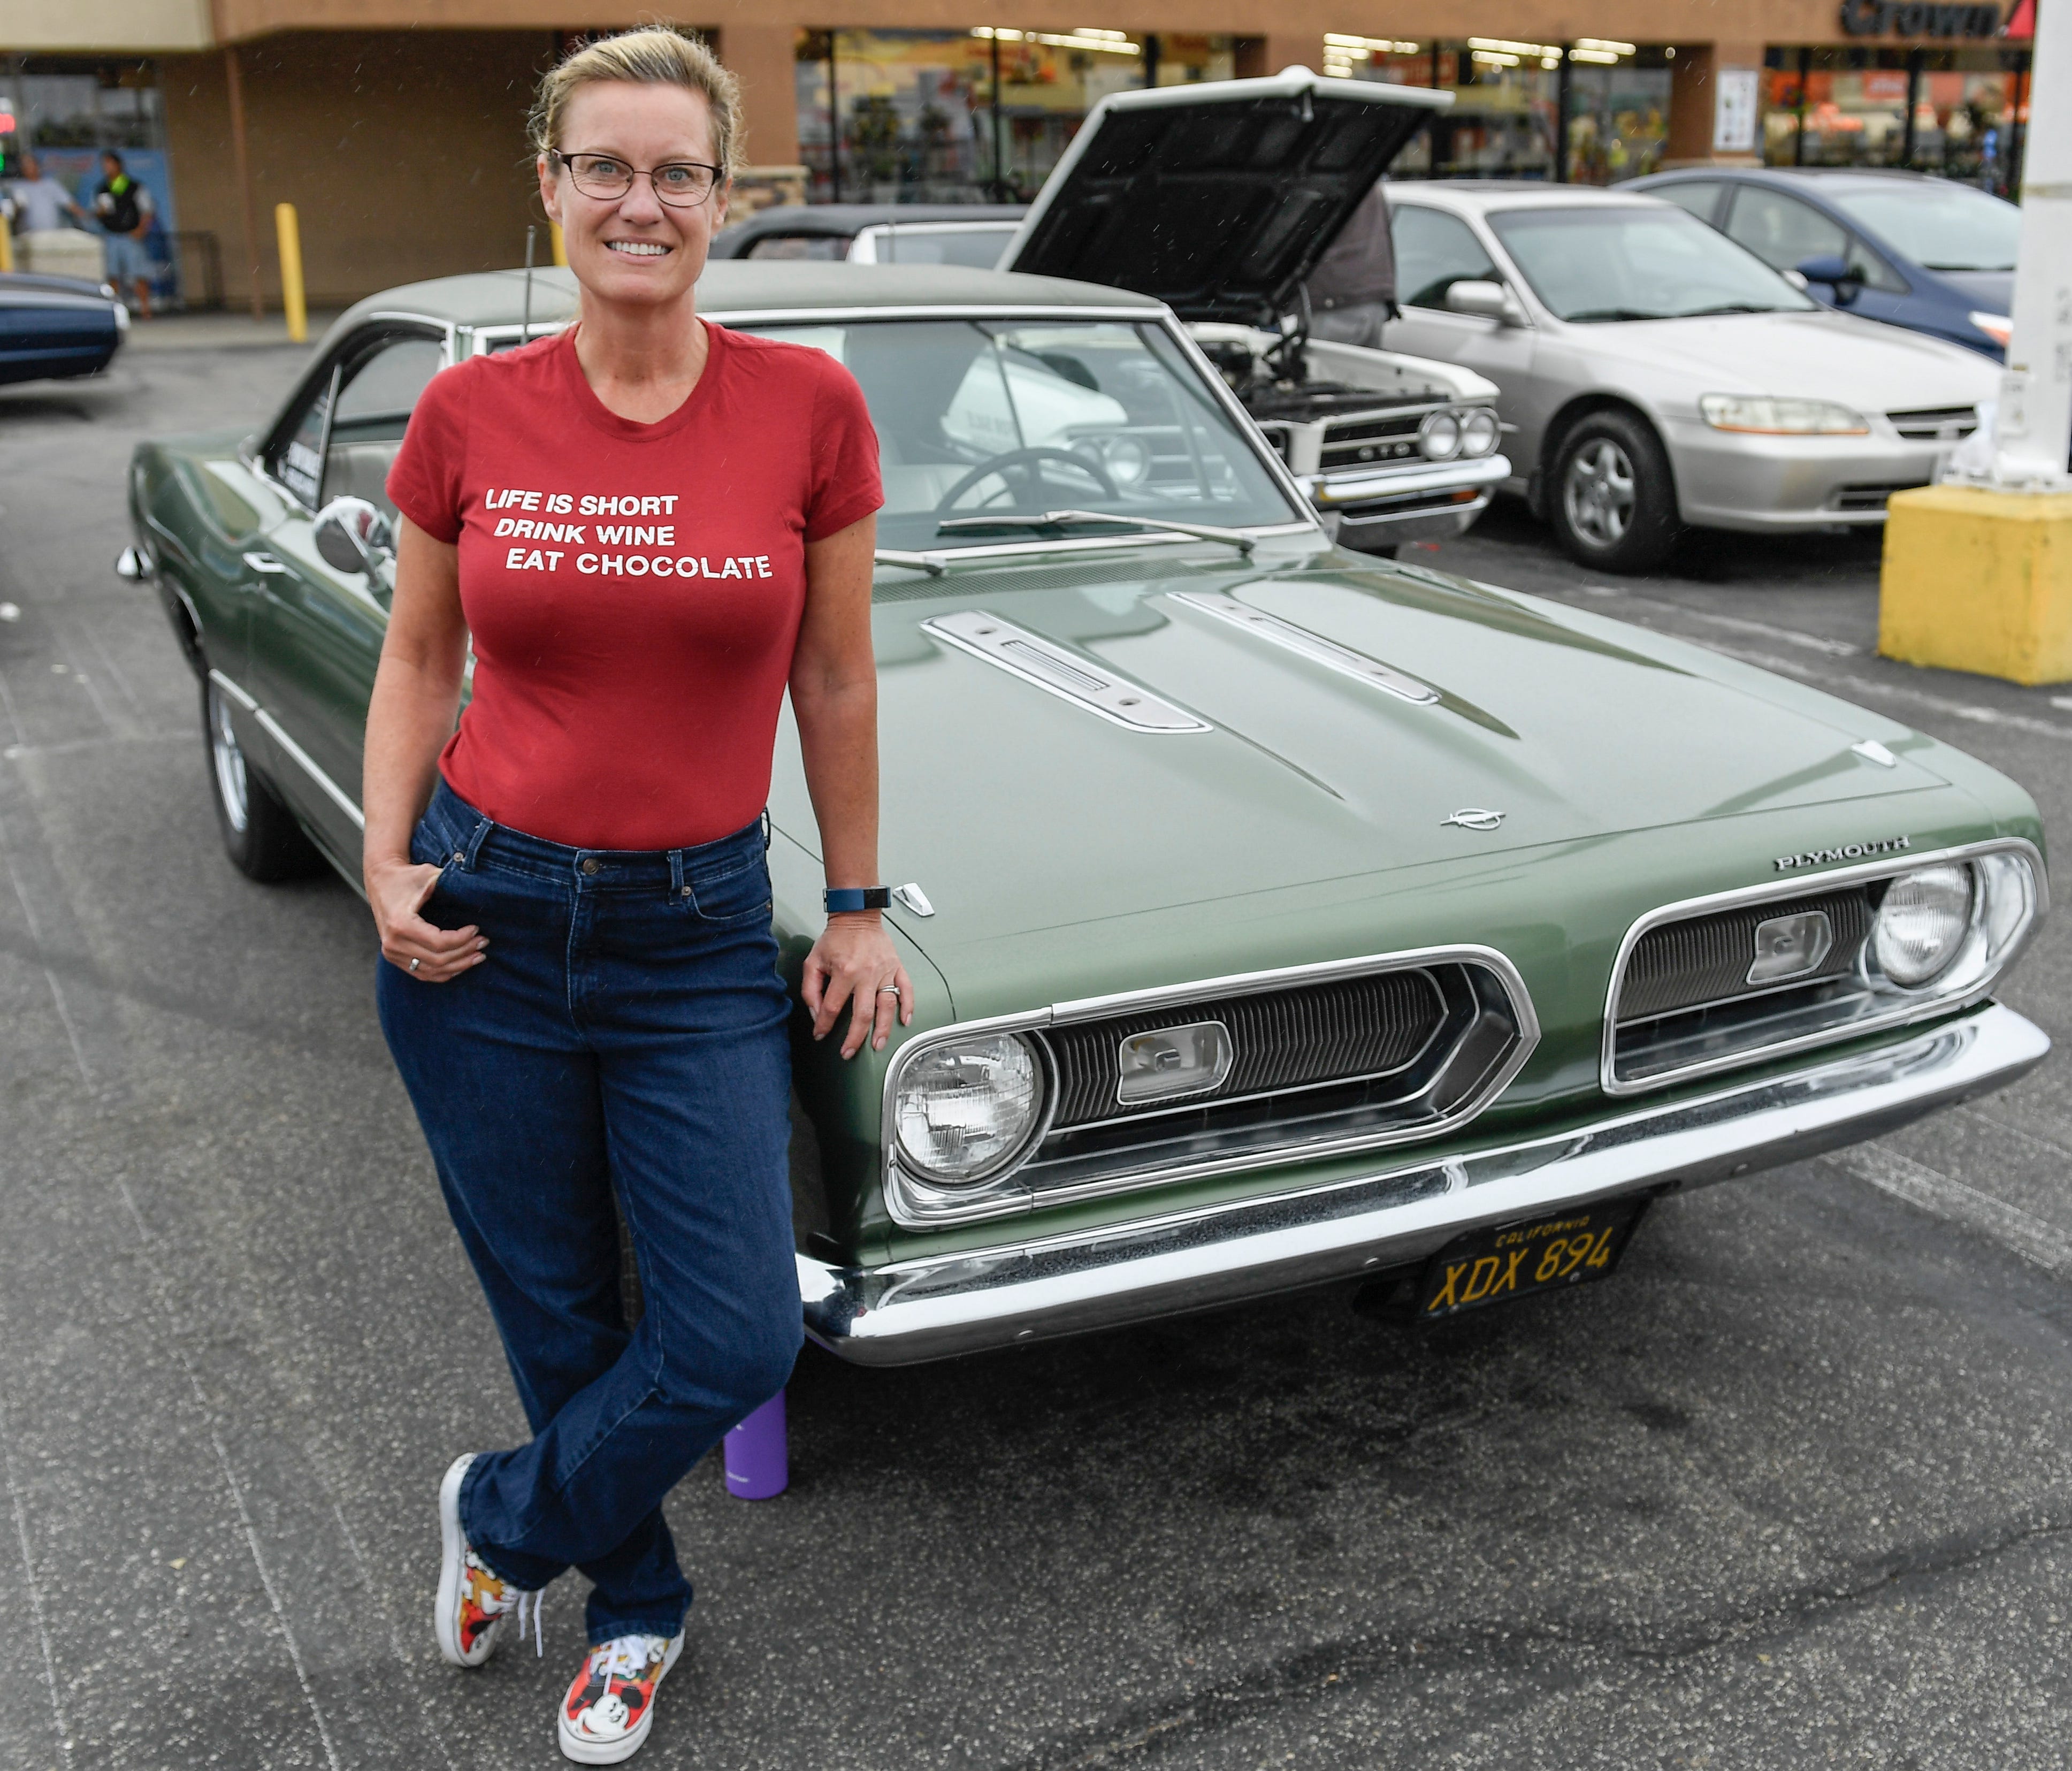 Maria Shrout with her classic Plymouth Barracuda at a car show in Huntington Beach, Calif.